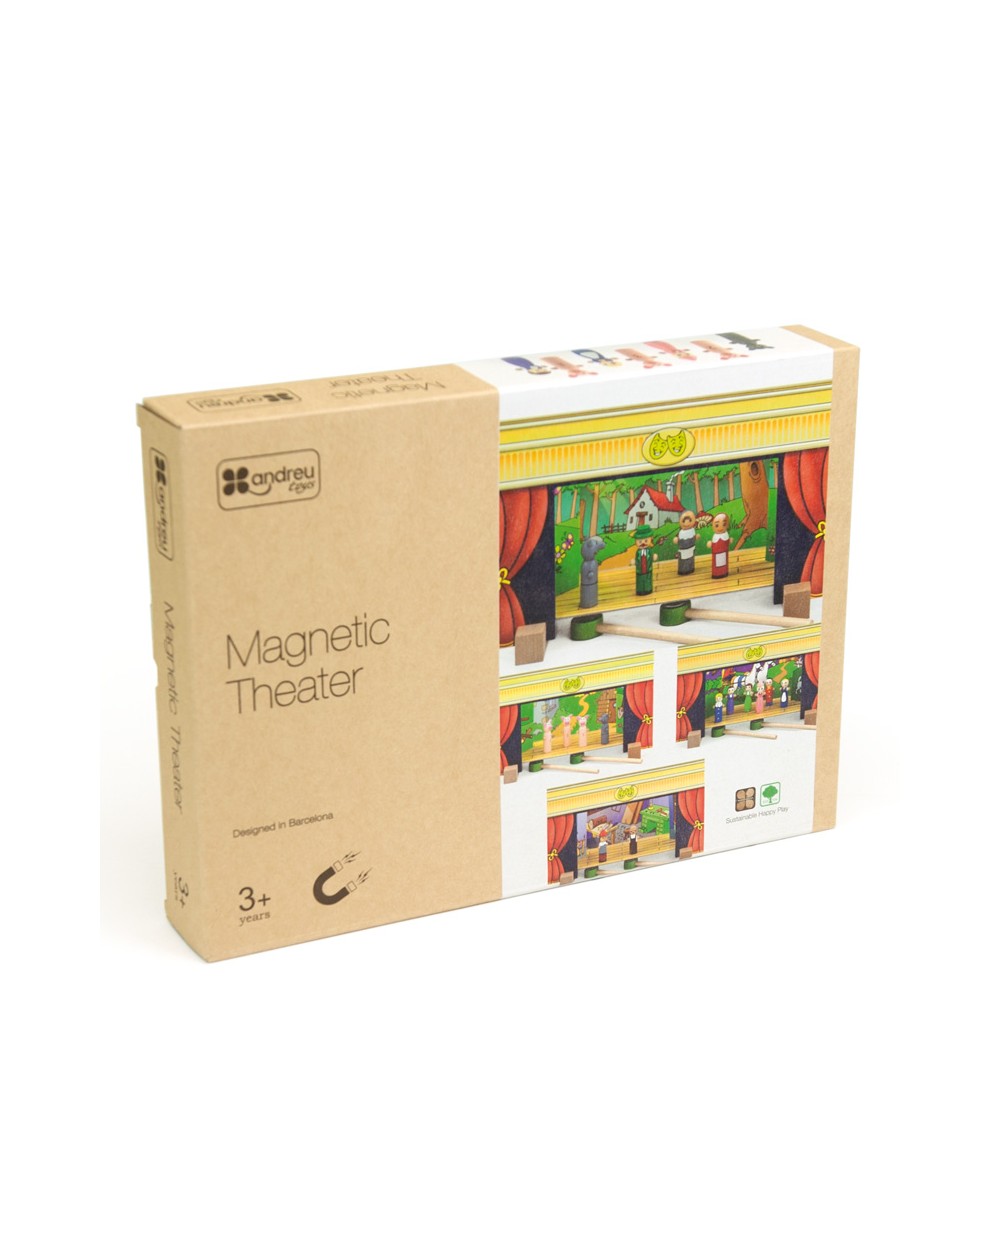 MAGNETIC THEATER Andreu Toys